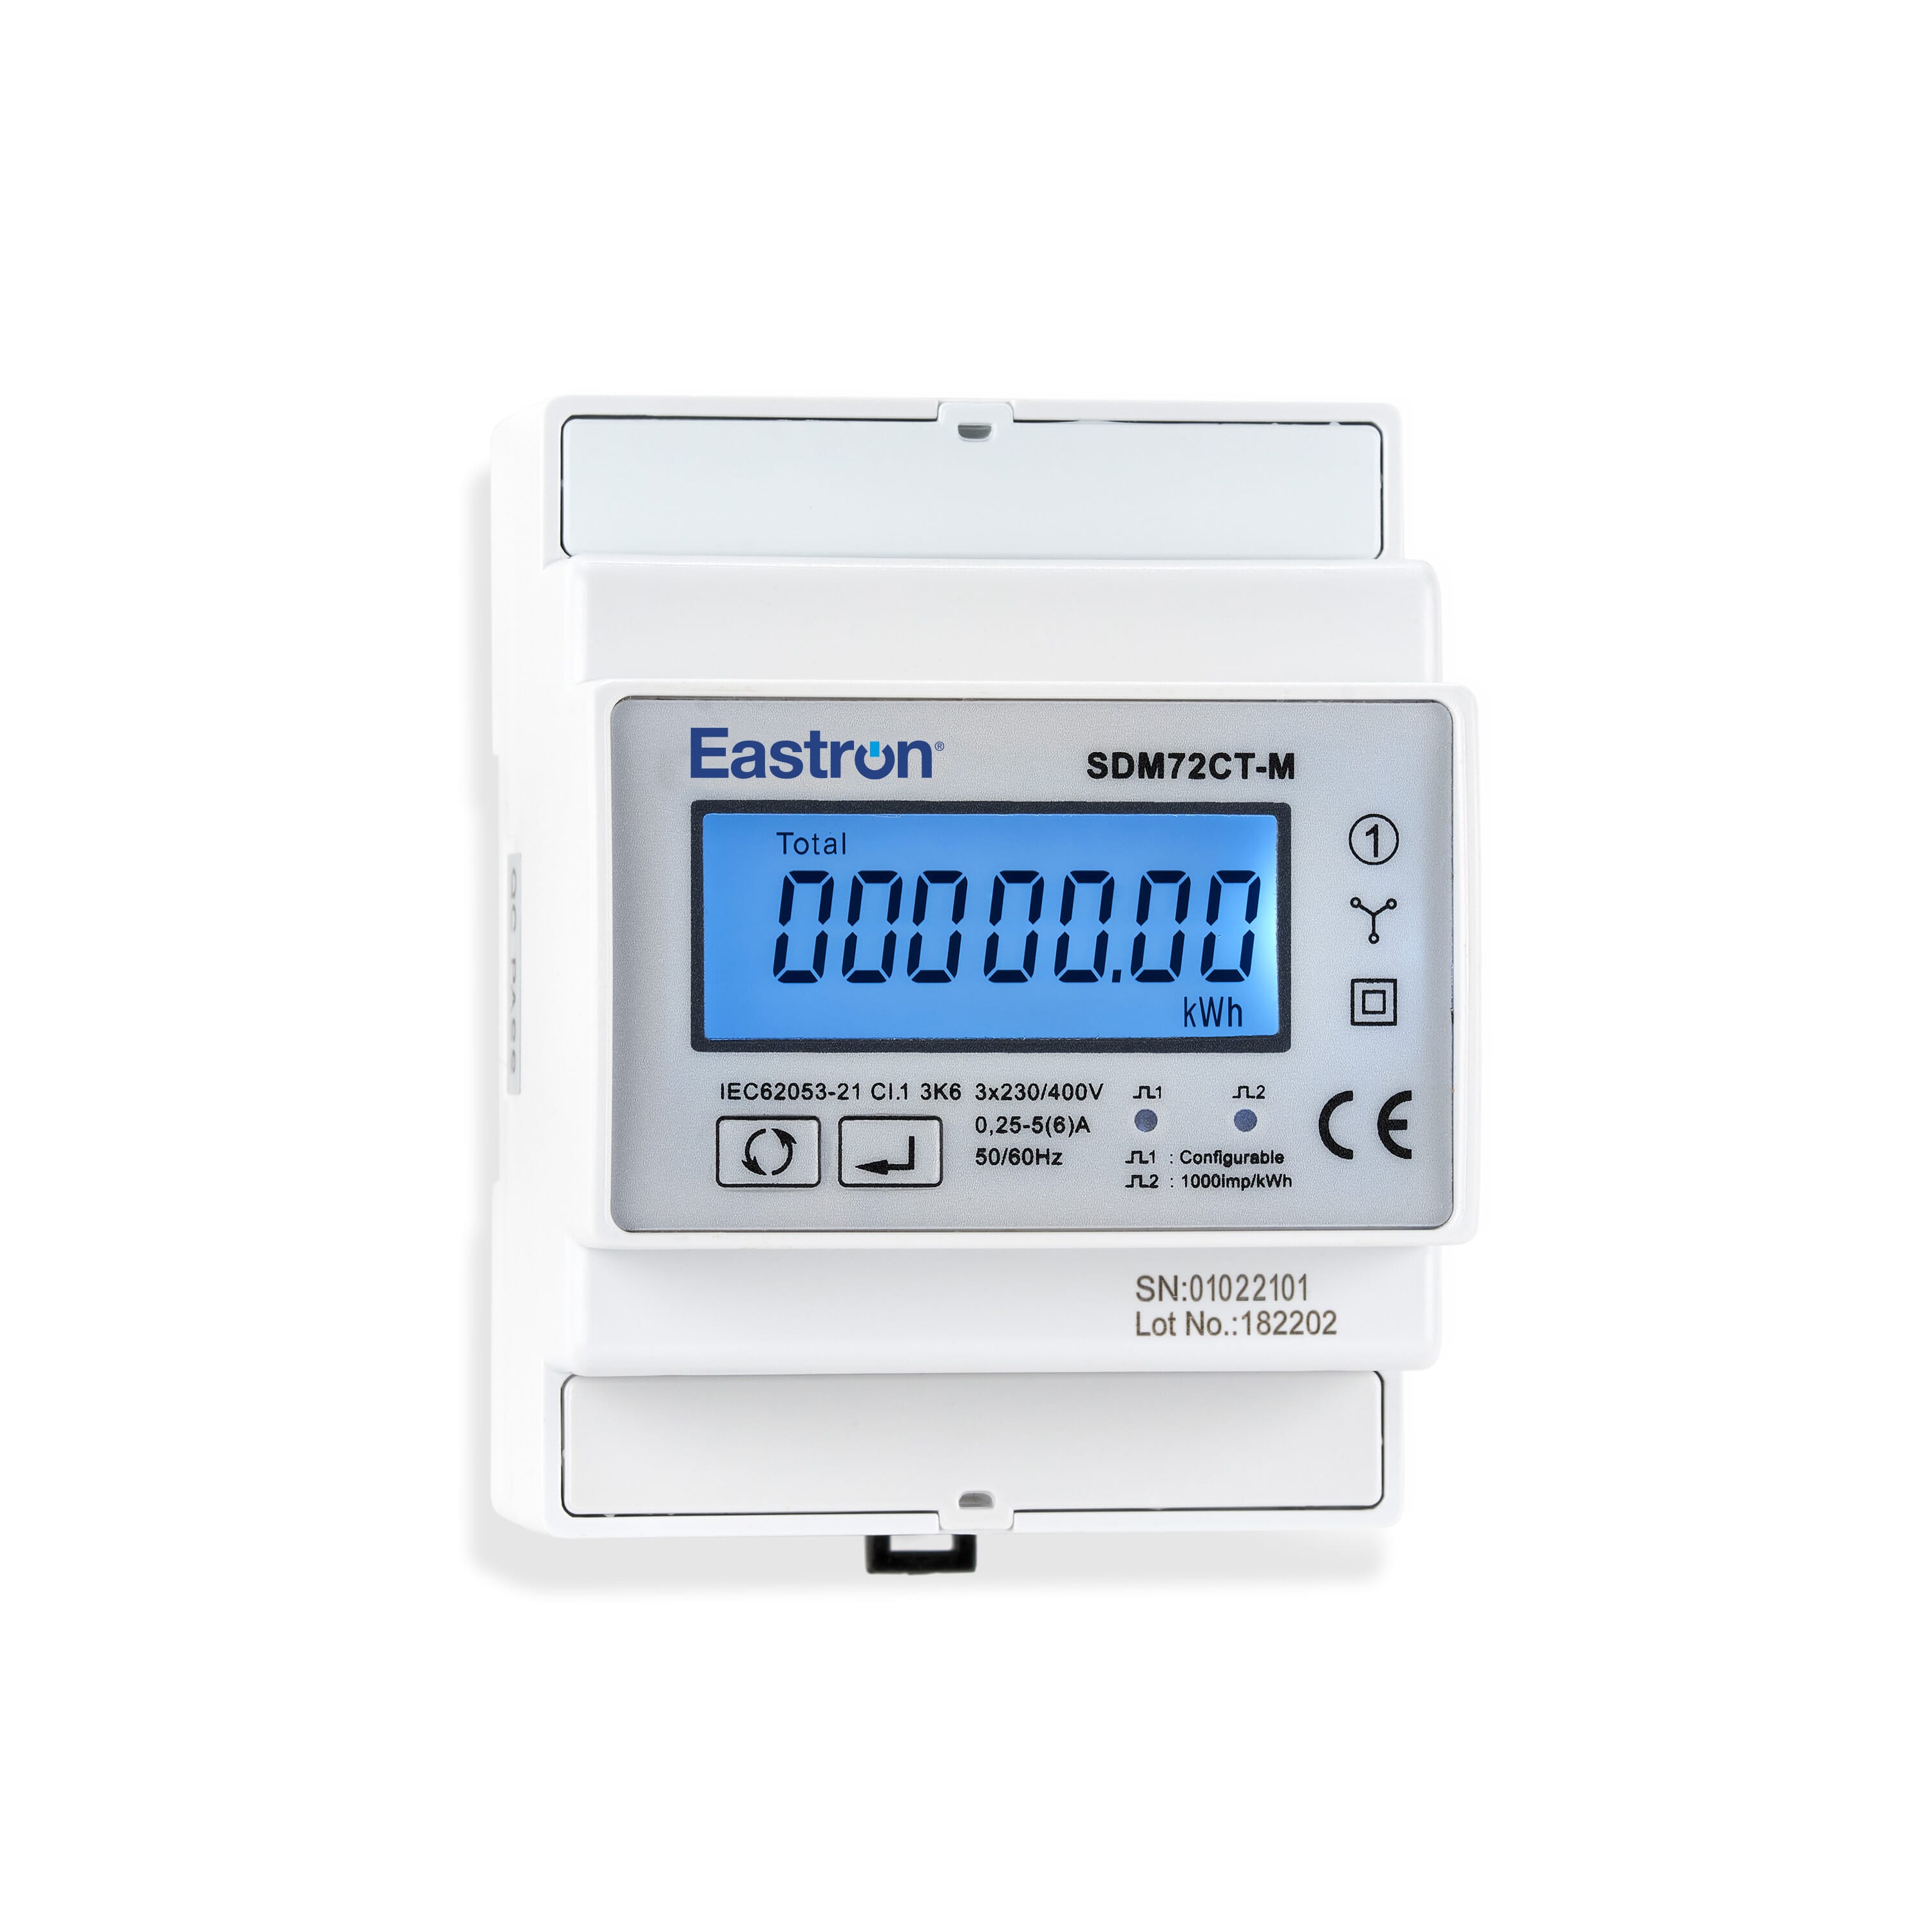 SDM72CT-D, DIN Rail Mount kWh Meter, 3 Phase, with Resettable Energy Register, 500VAC L-L, Class 1, 1/5 Amp CT Connect input, w/ 1 x fixed pulse output and RS485 Comms, MID Approved. Built for EV Chargers